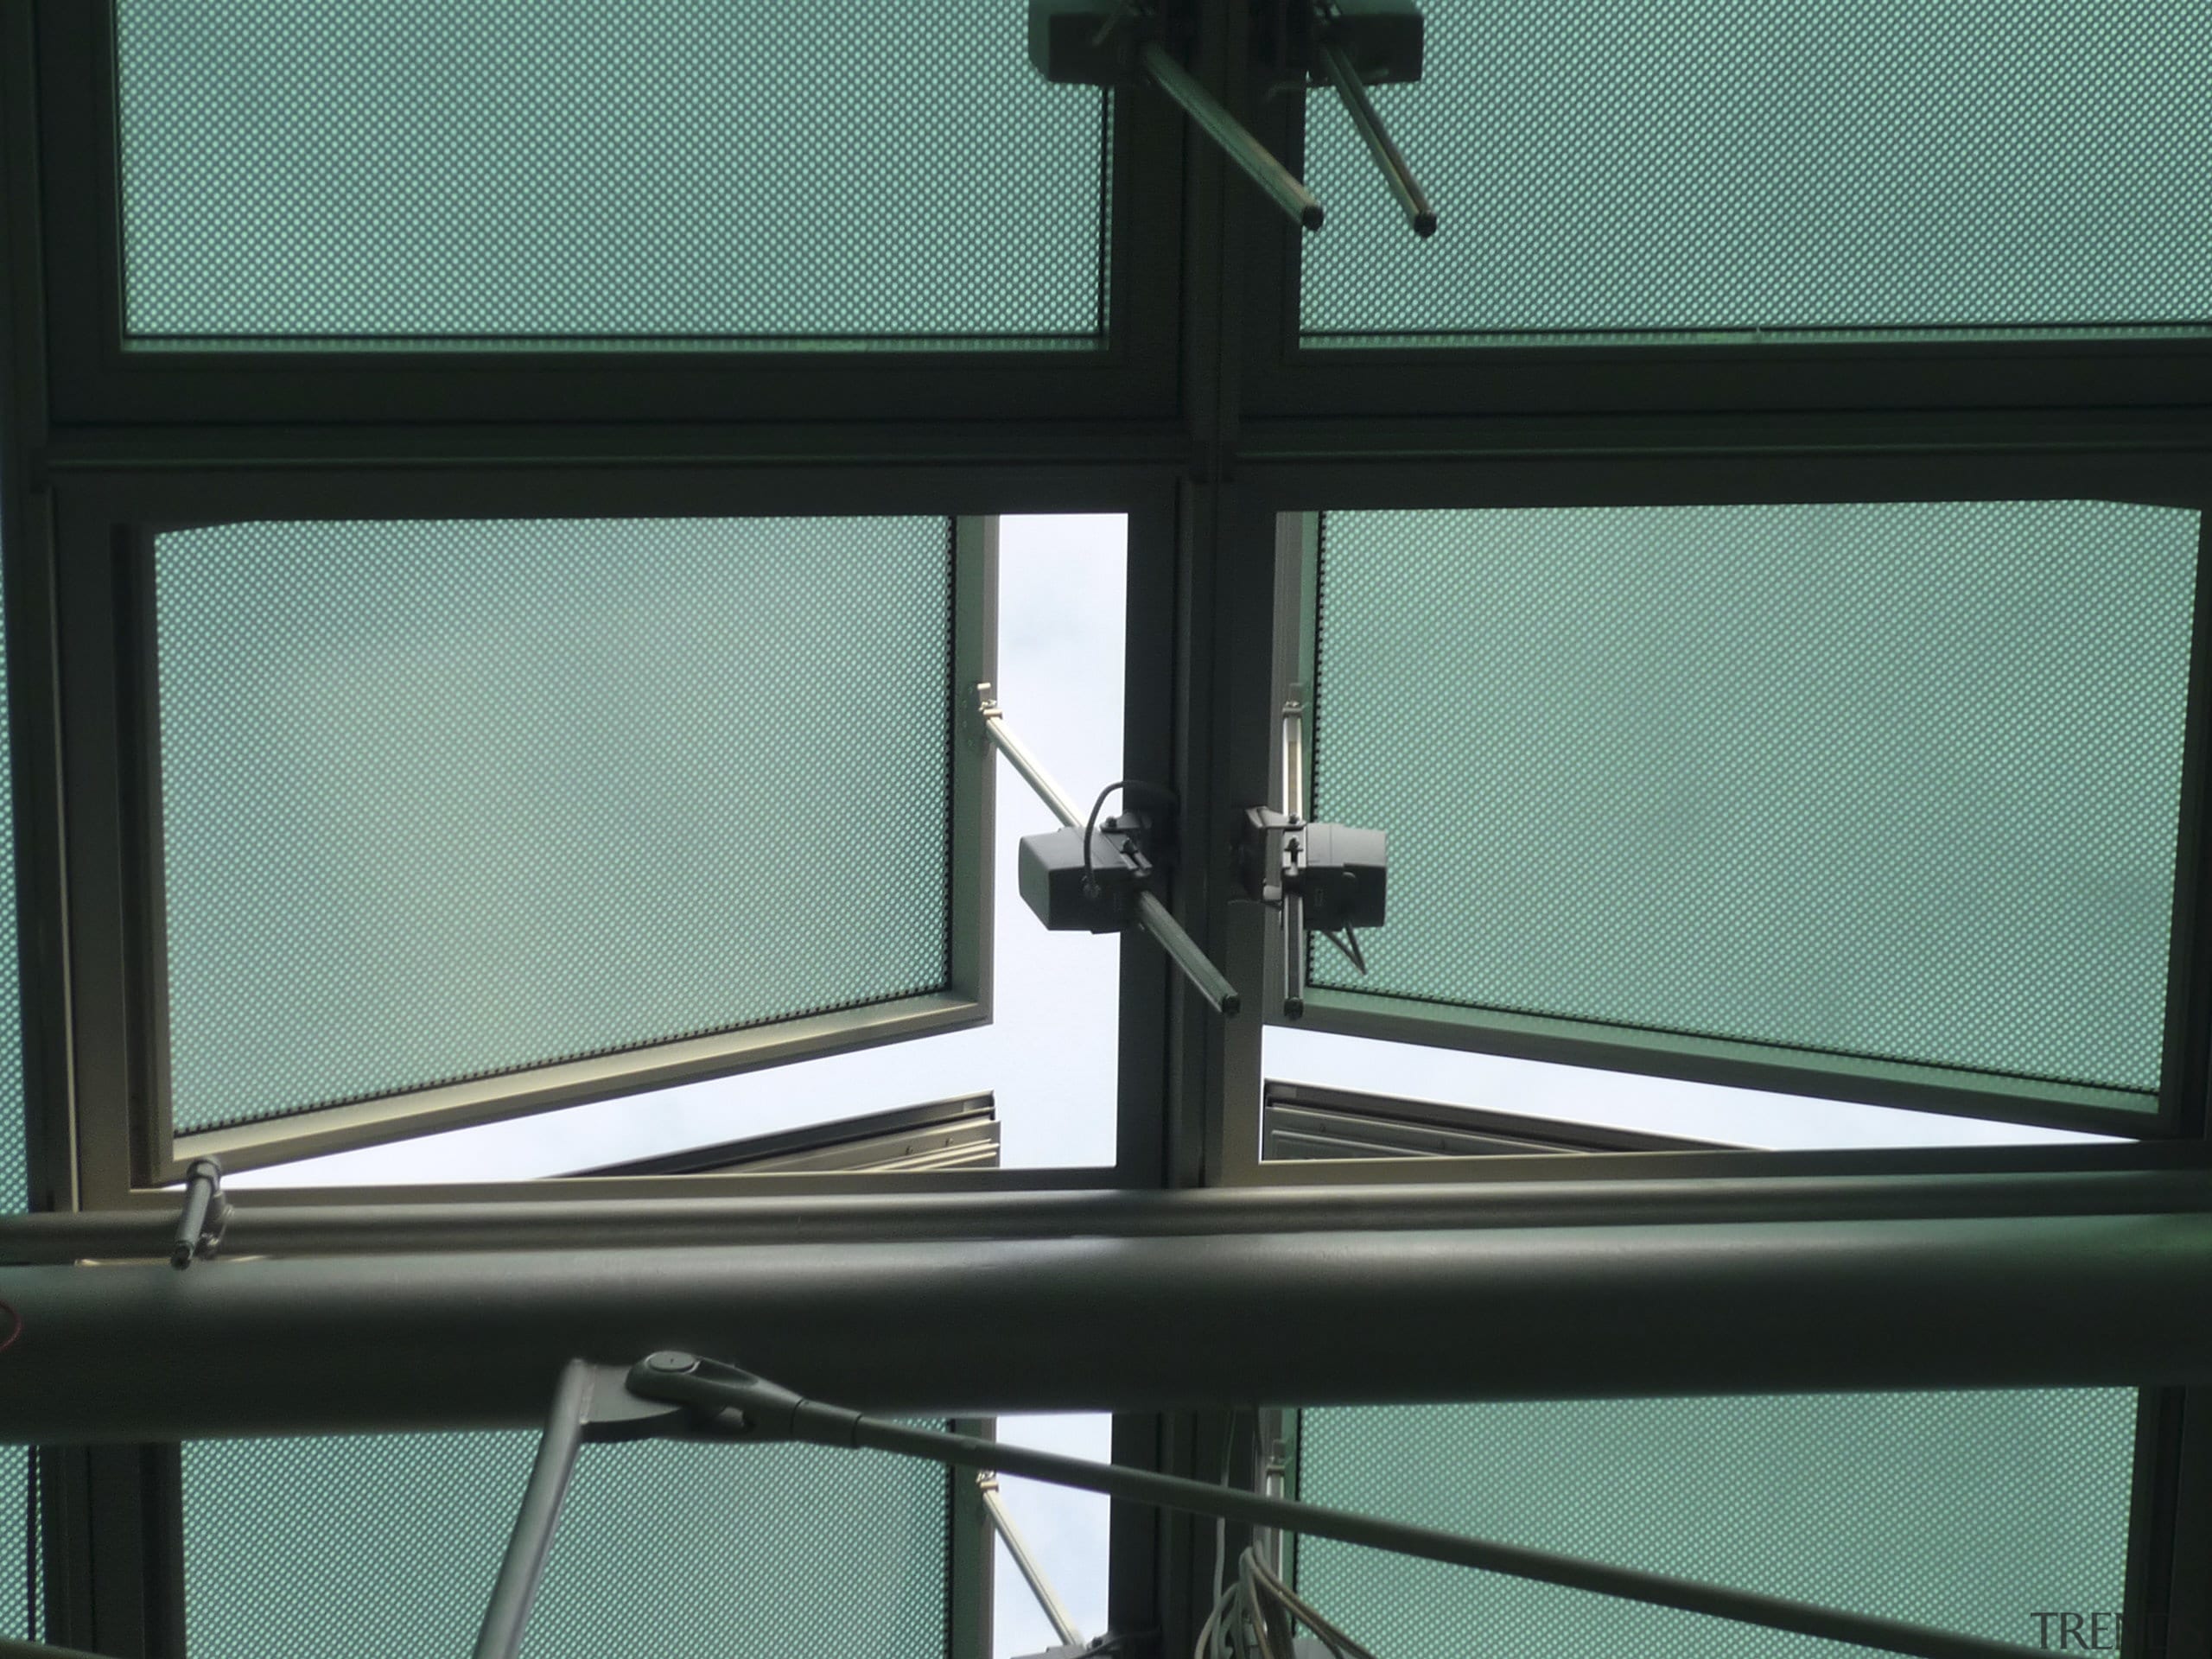 Close up detail of window system. - Close daylighting, glass, shade, window, teal, black